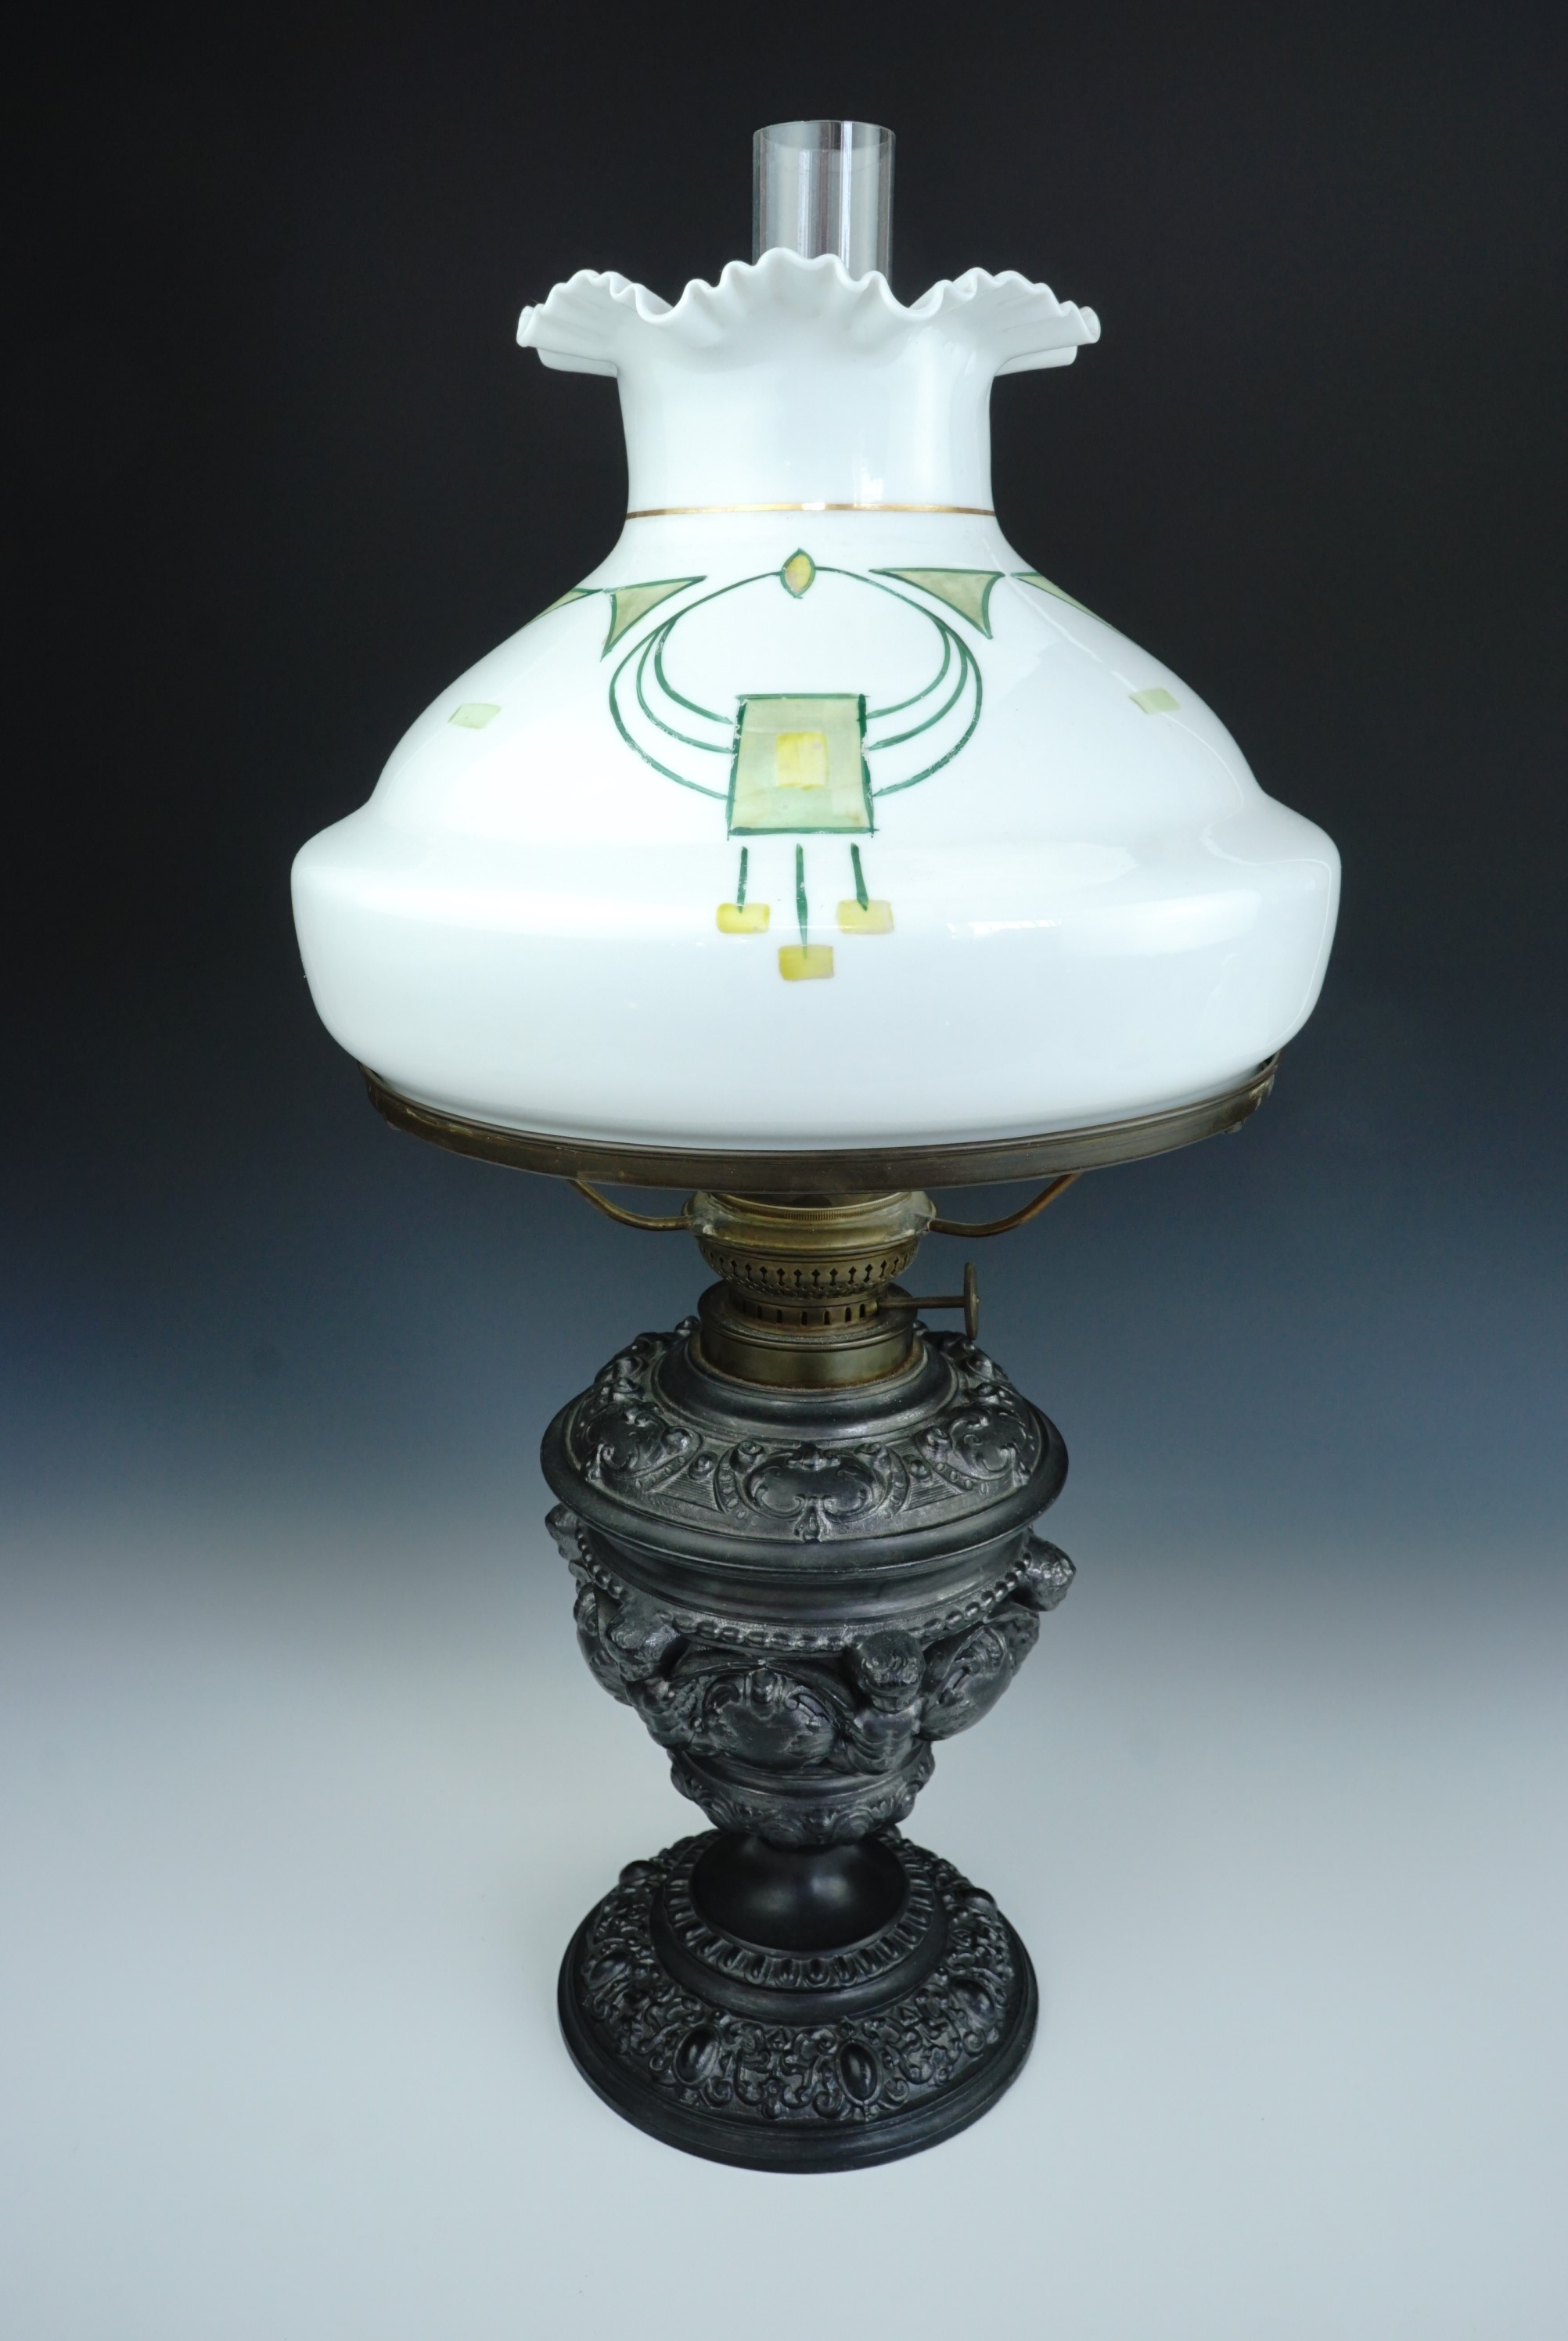 An antique German Kosmos Brenner Baroque style base metal oil lamp, the base incorporating winged